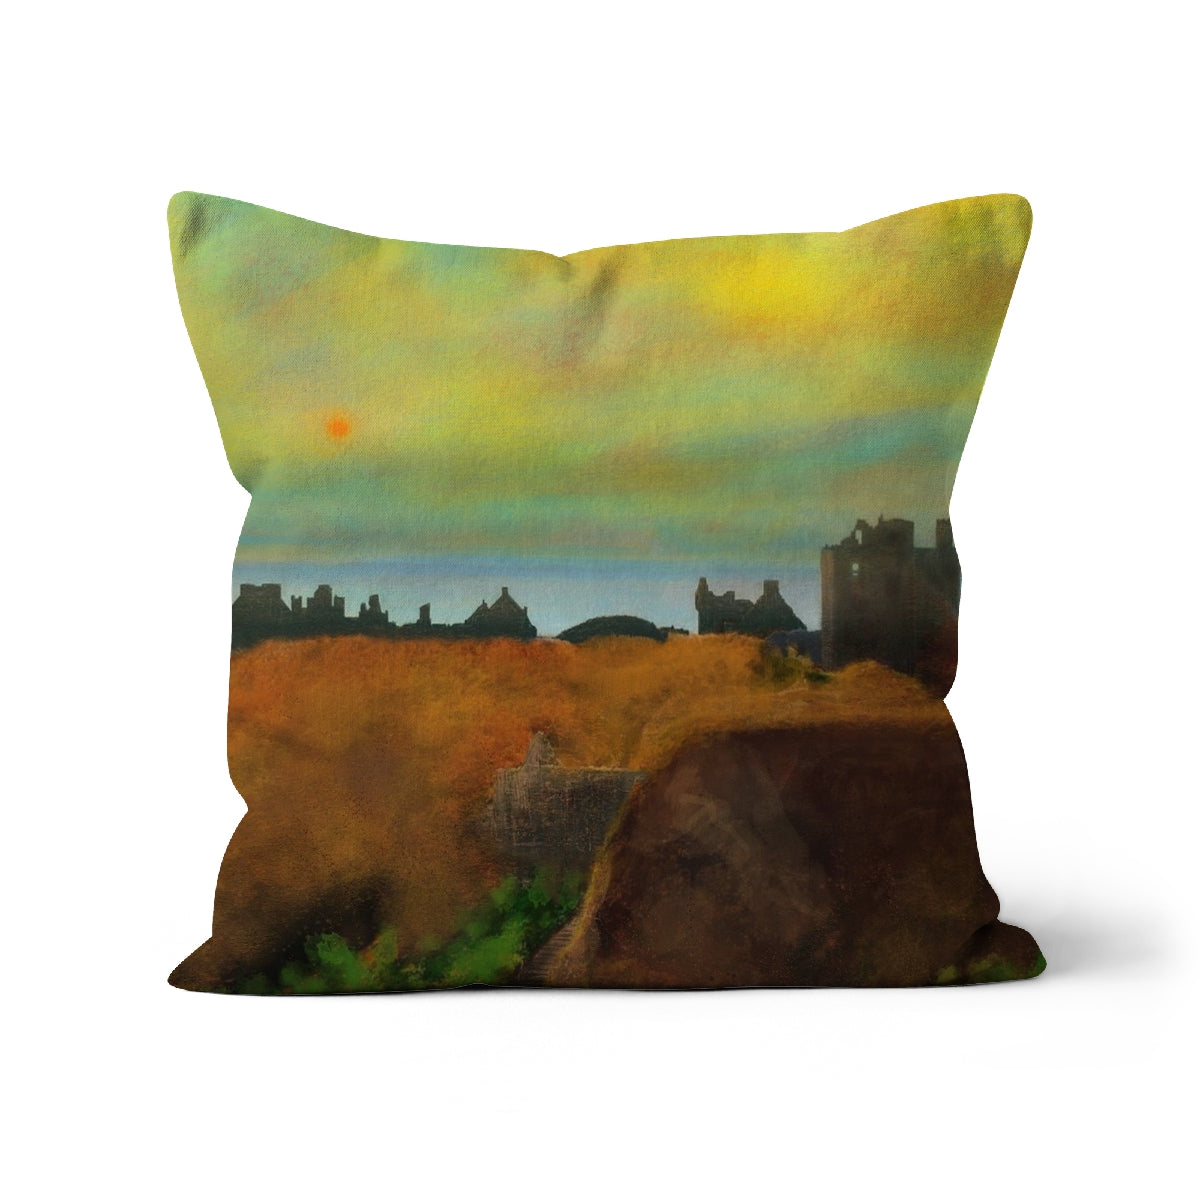 Dunnottar Castle Dusk Art Gifts Cushion-Cushions-Historic & Iconic Scotland Art Gallery-Linen-12"x12"-Paintings, Prints, Homeware, Art Gifts From Scotland By Scottish Artist Kevin Hunter